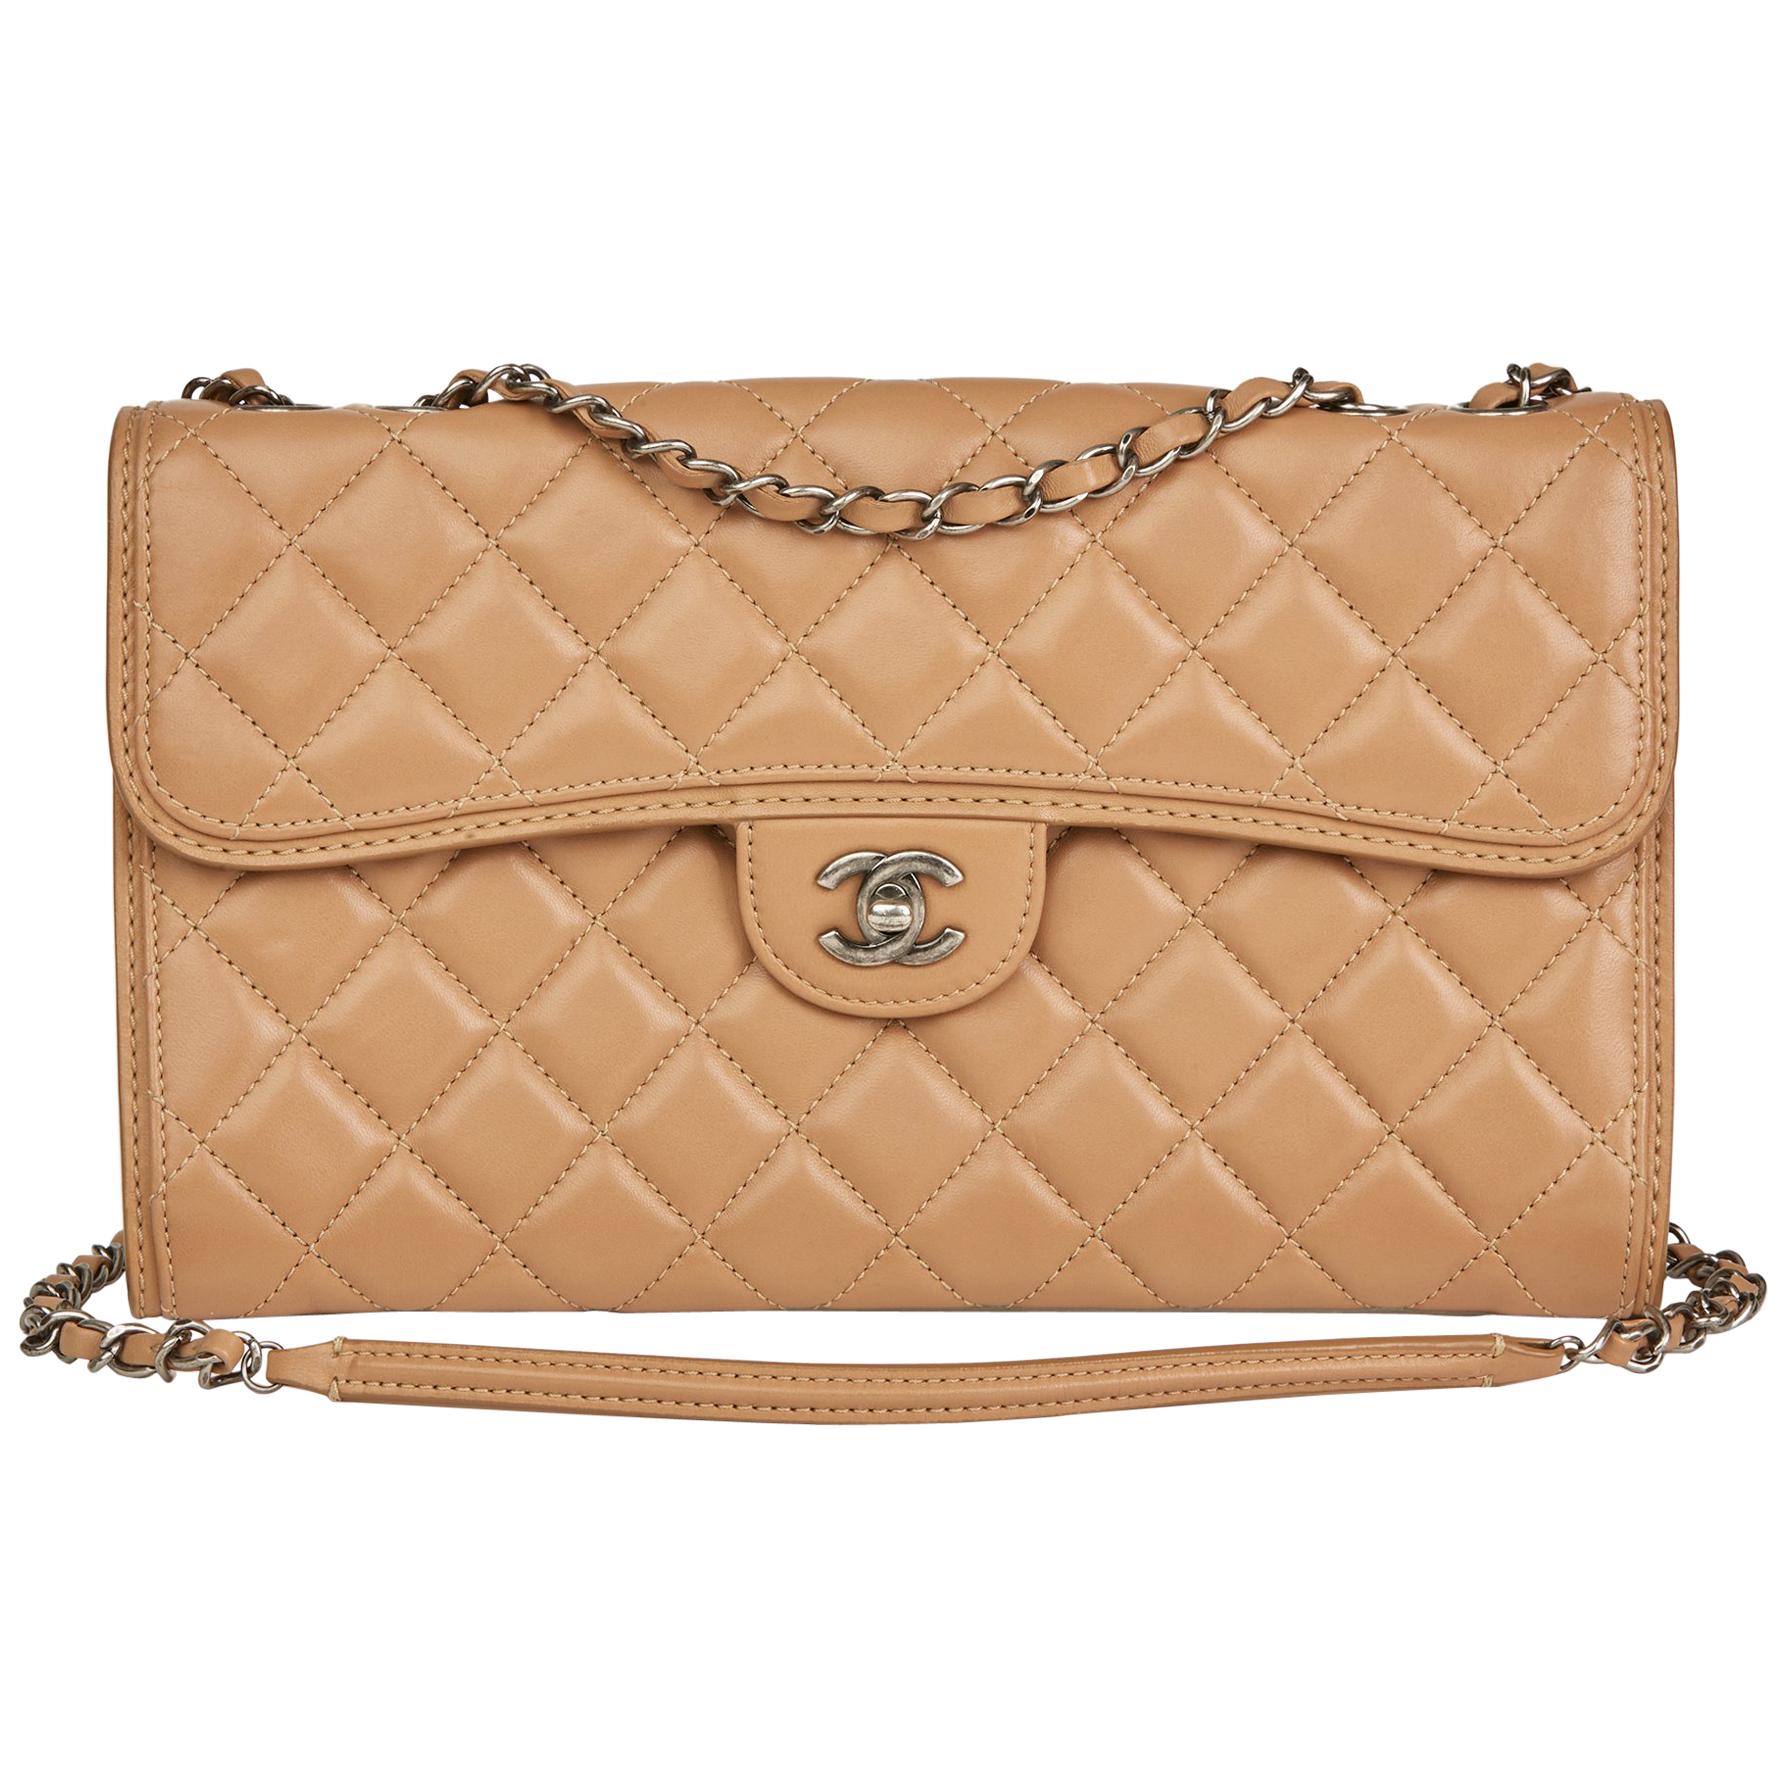 2014 Chanel Mocha Quilted Lambskin Classic Single Flap Bag